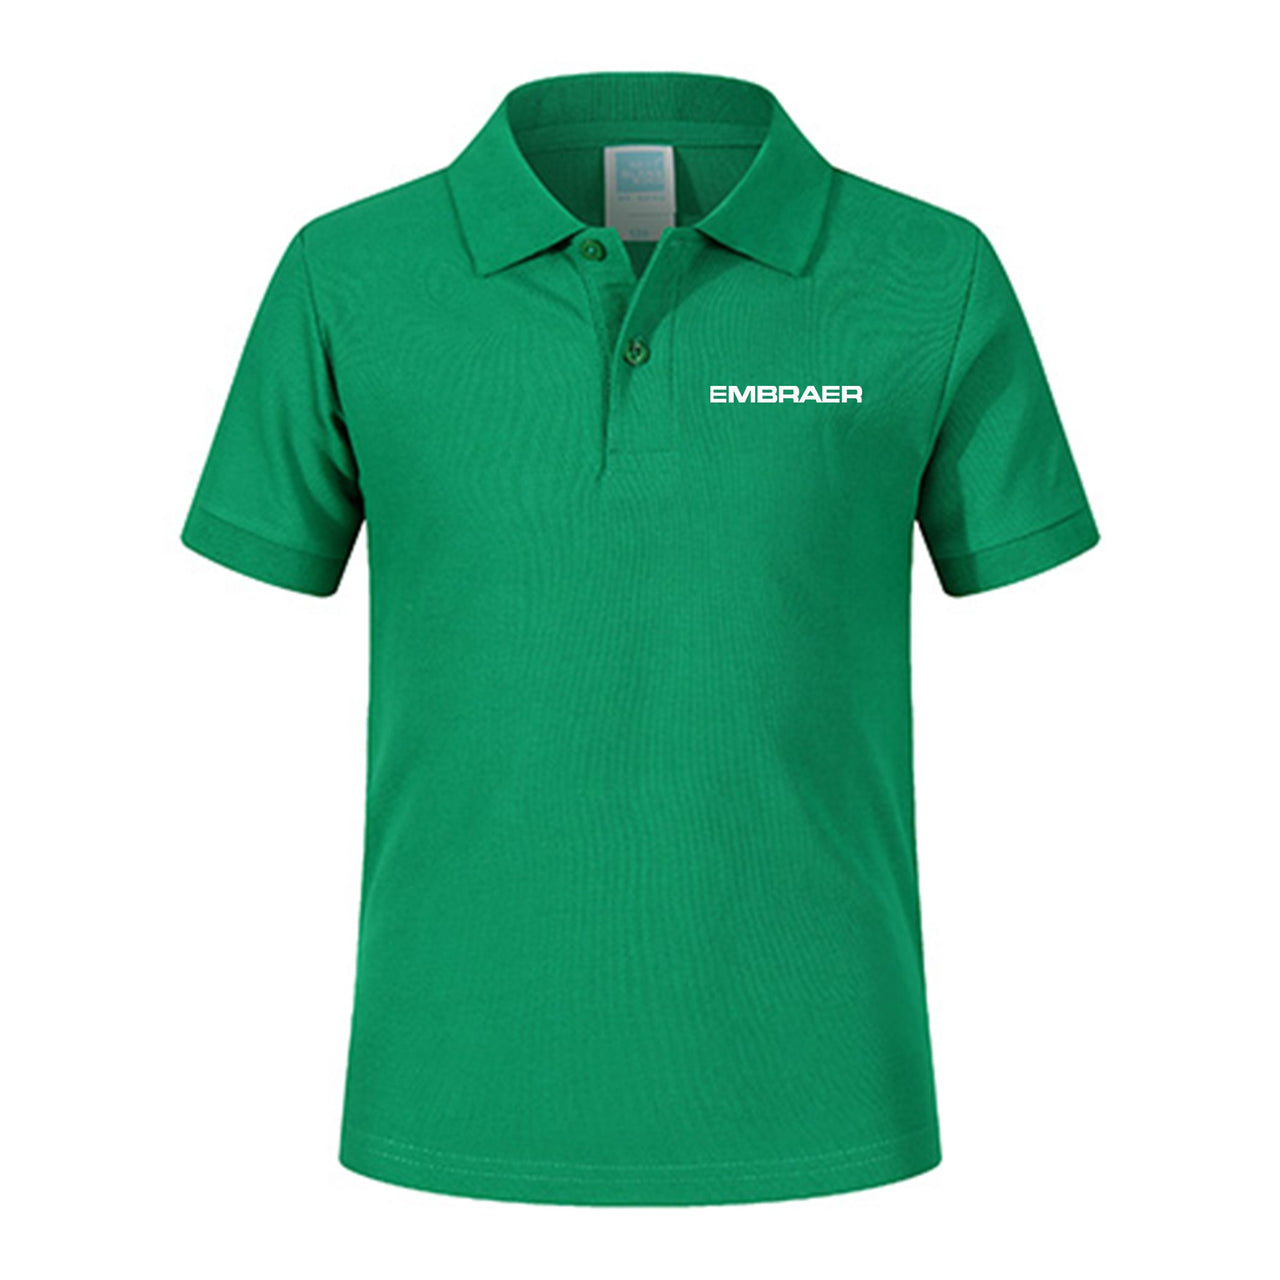 Embraer & Text Designed Children Polo T-Shirts